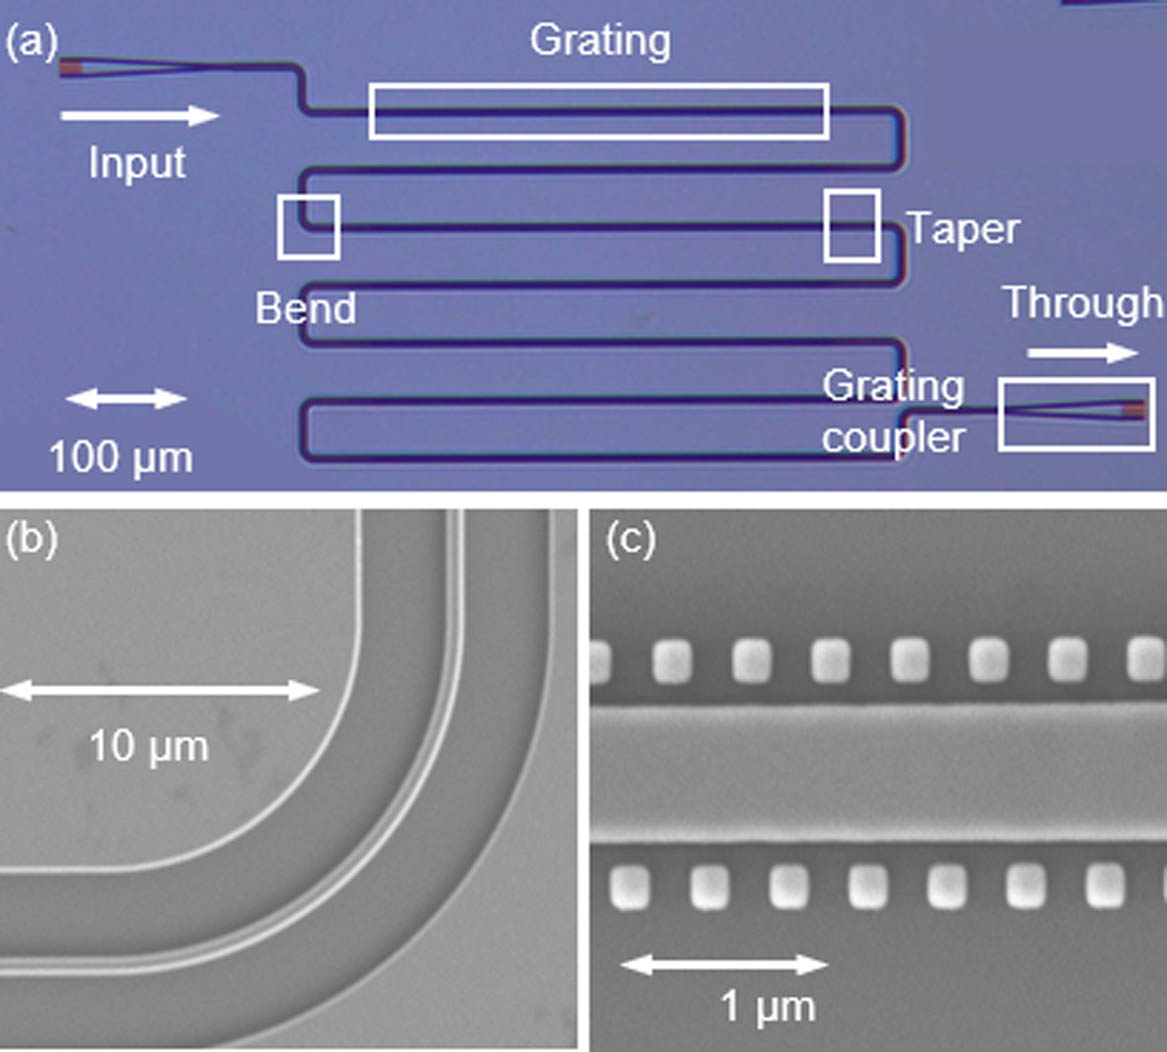 (a) Microscope image of one of the fabricated coherency-broken cascaded grating filters comprising seven Bragg grating filters. Scanning electron microscope image of (b) single-mode waveguide bend and (c) cladding-modulated grating filter.